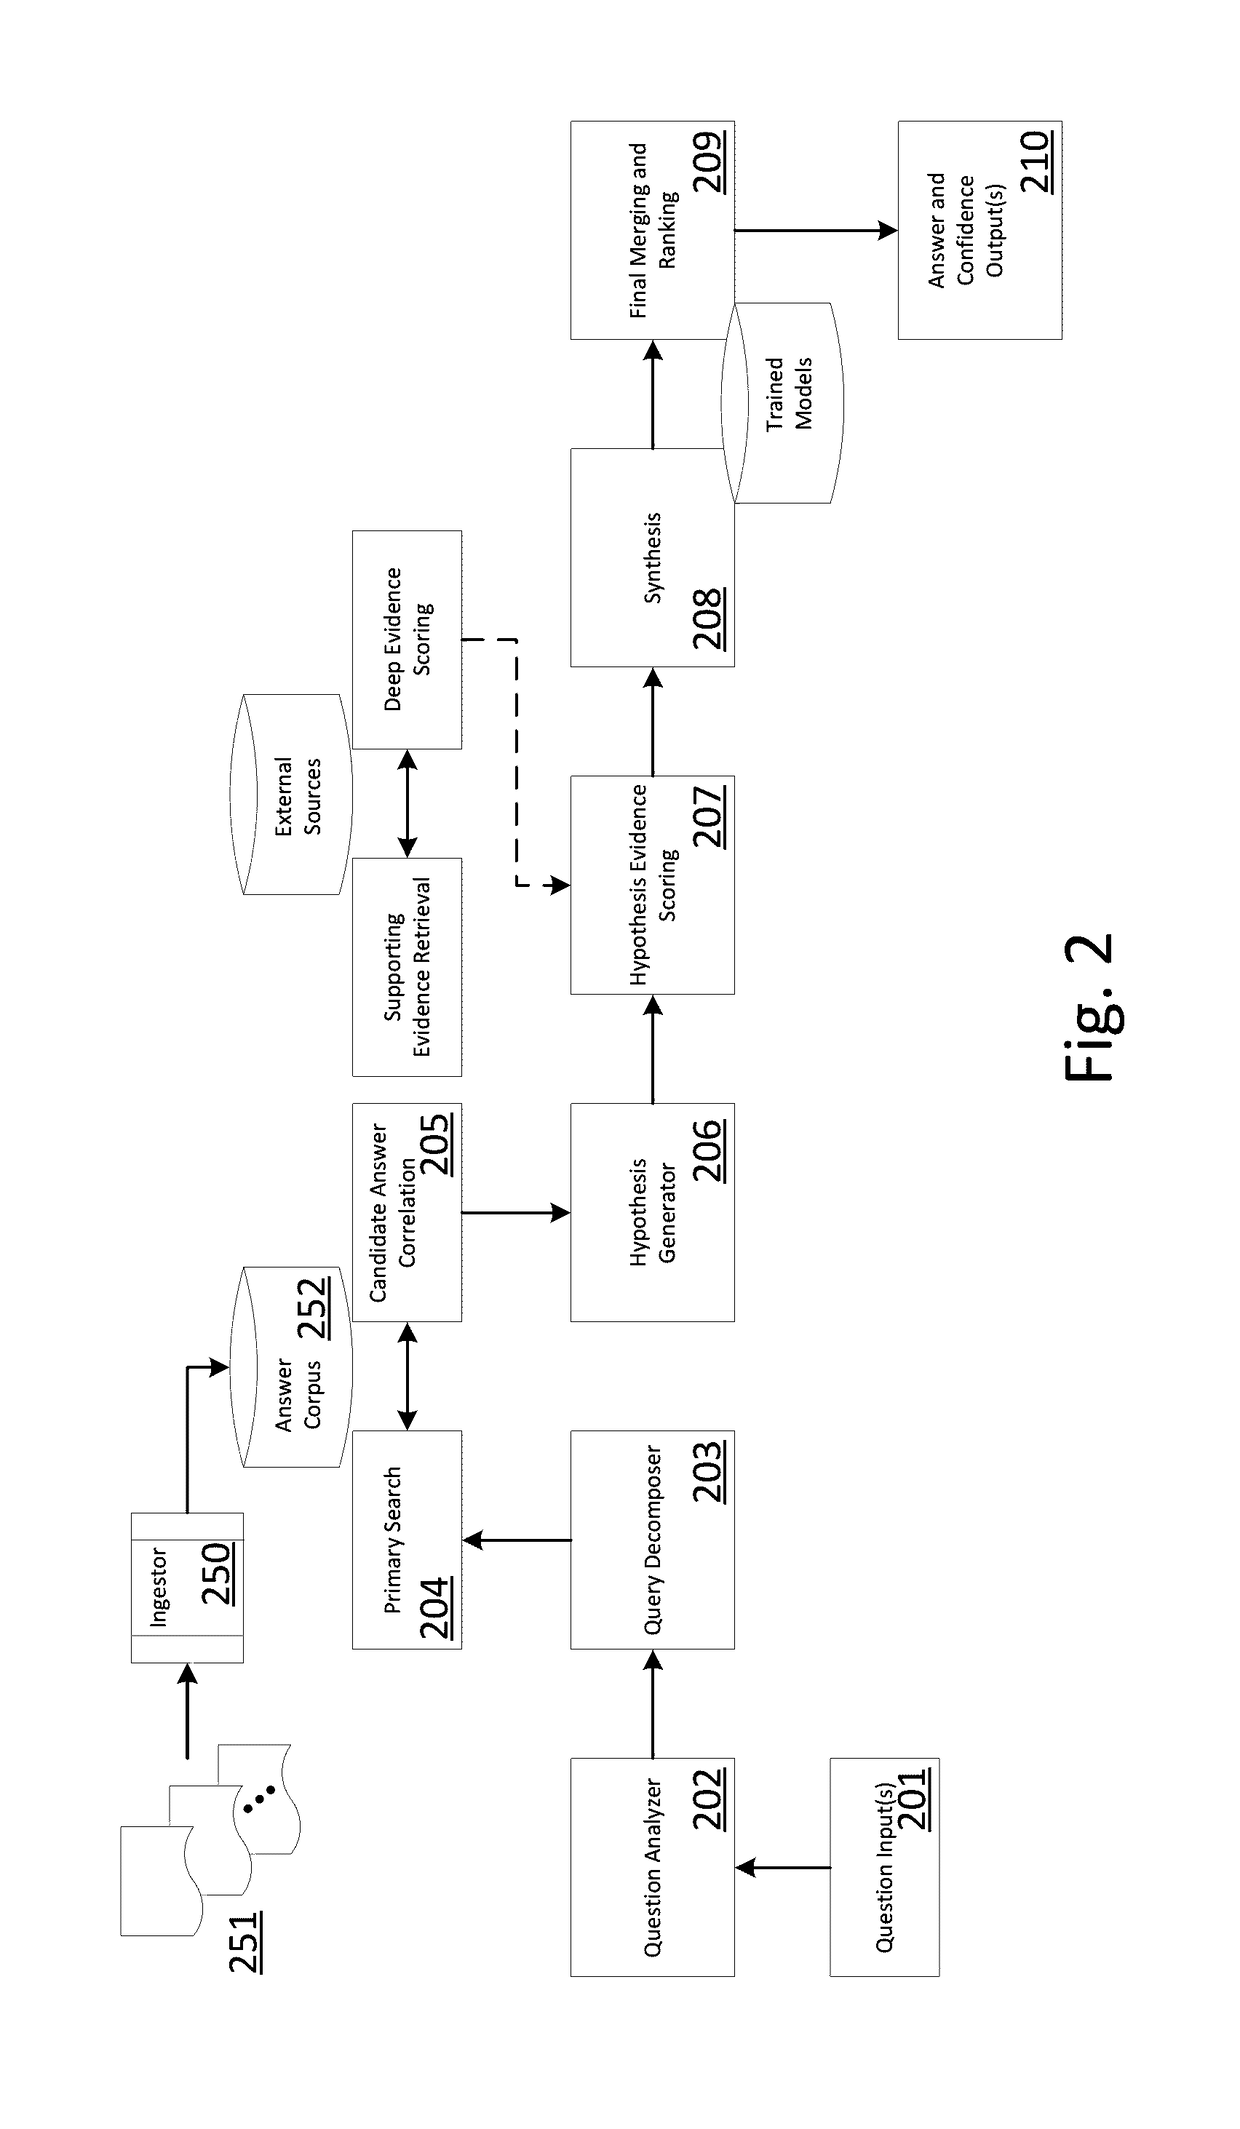 Discrepancy Handler for Document Ingestion into a Corpus for a Cognitive Computing System